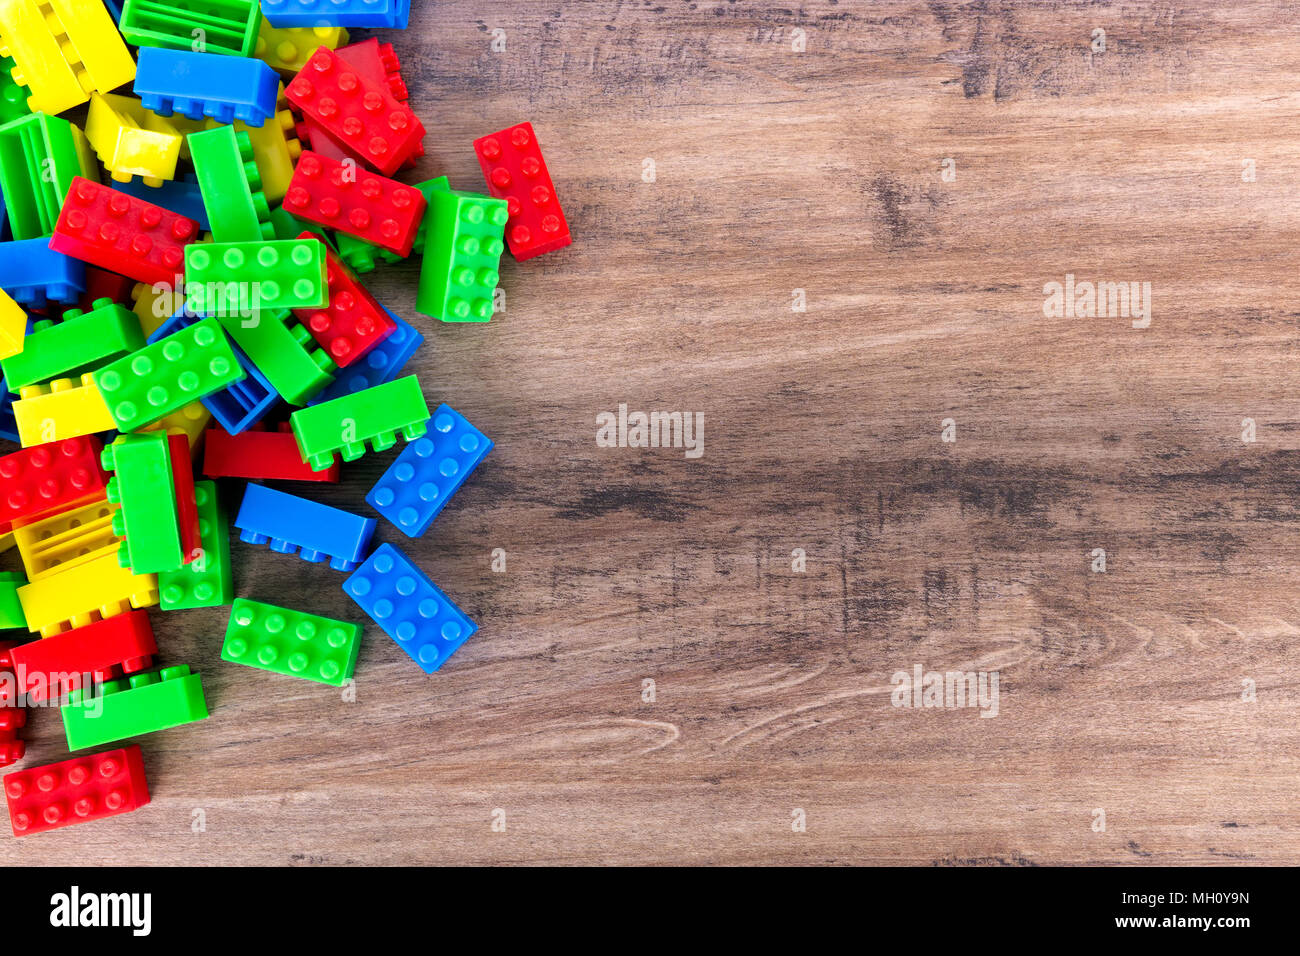 Top view of colorful toy building blocks on wood background with copy space Stock Photo